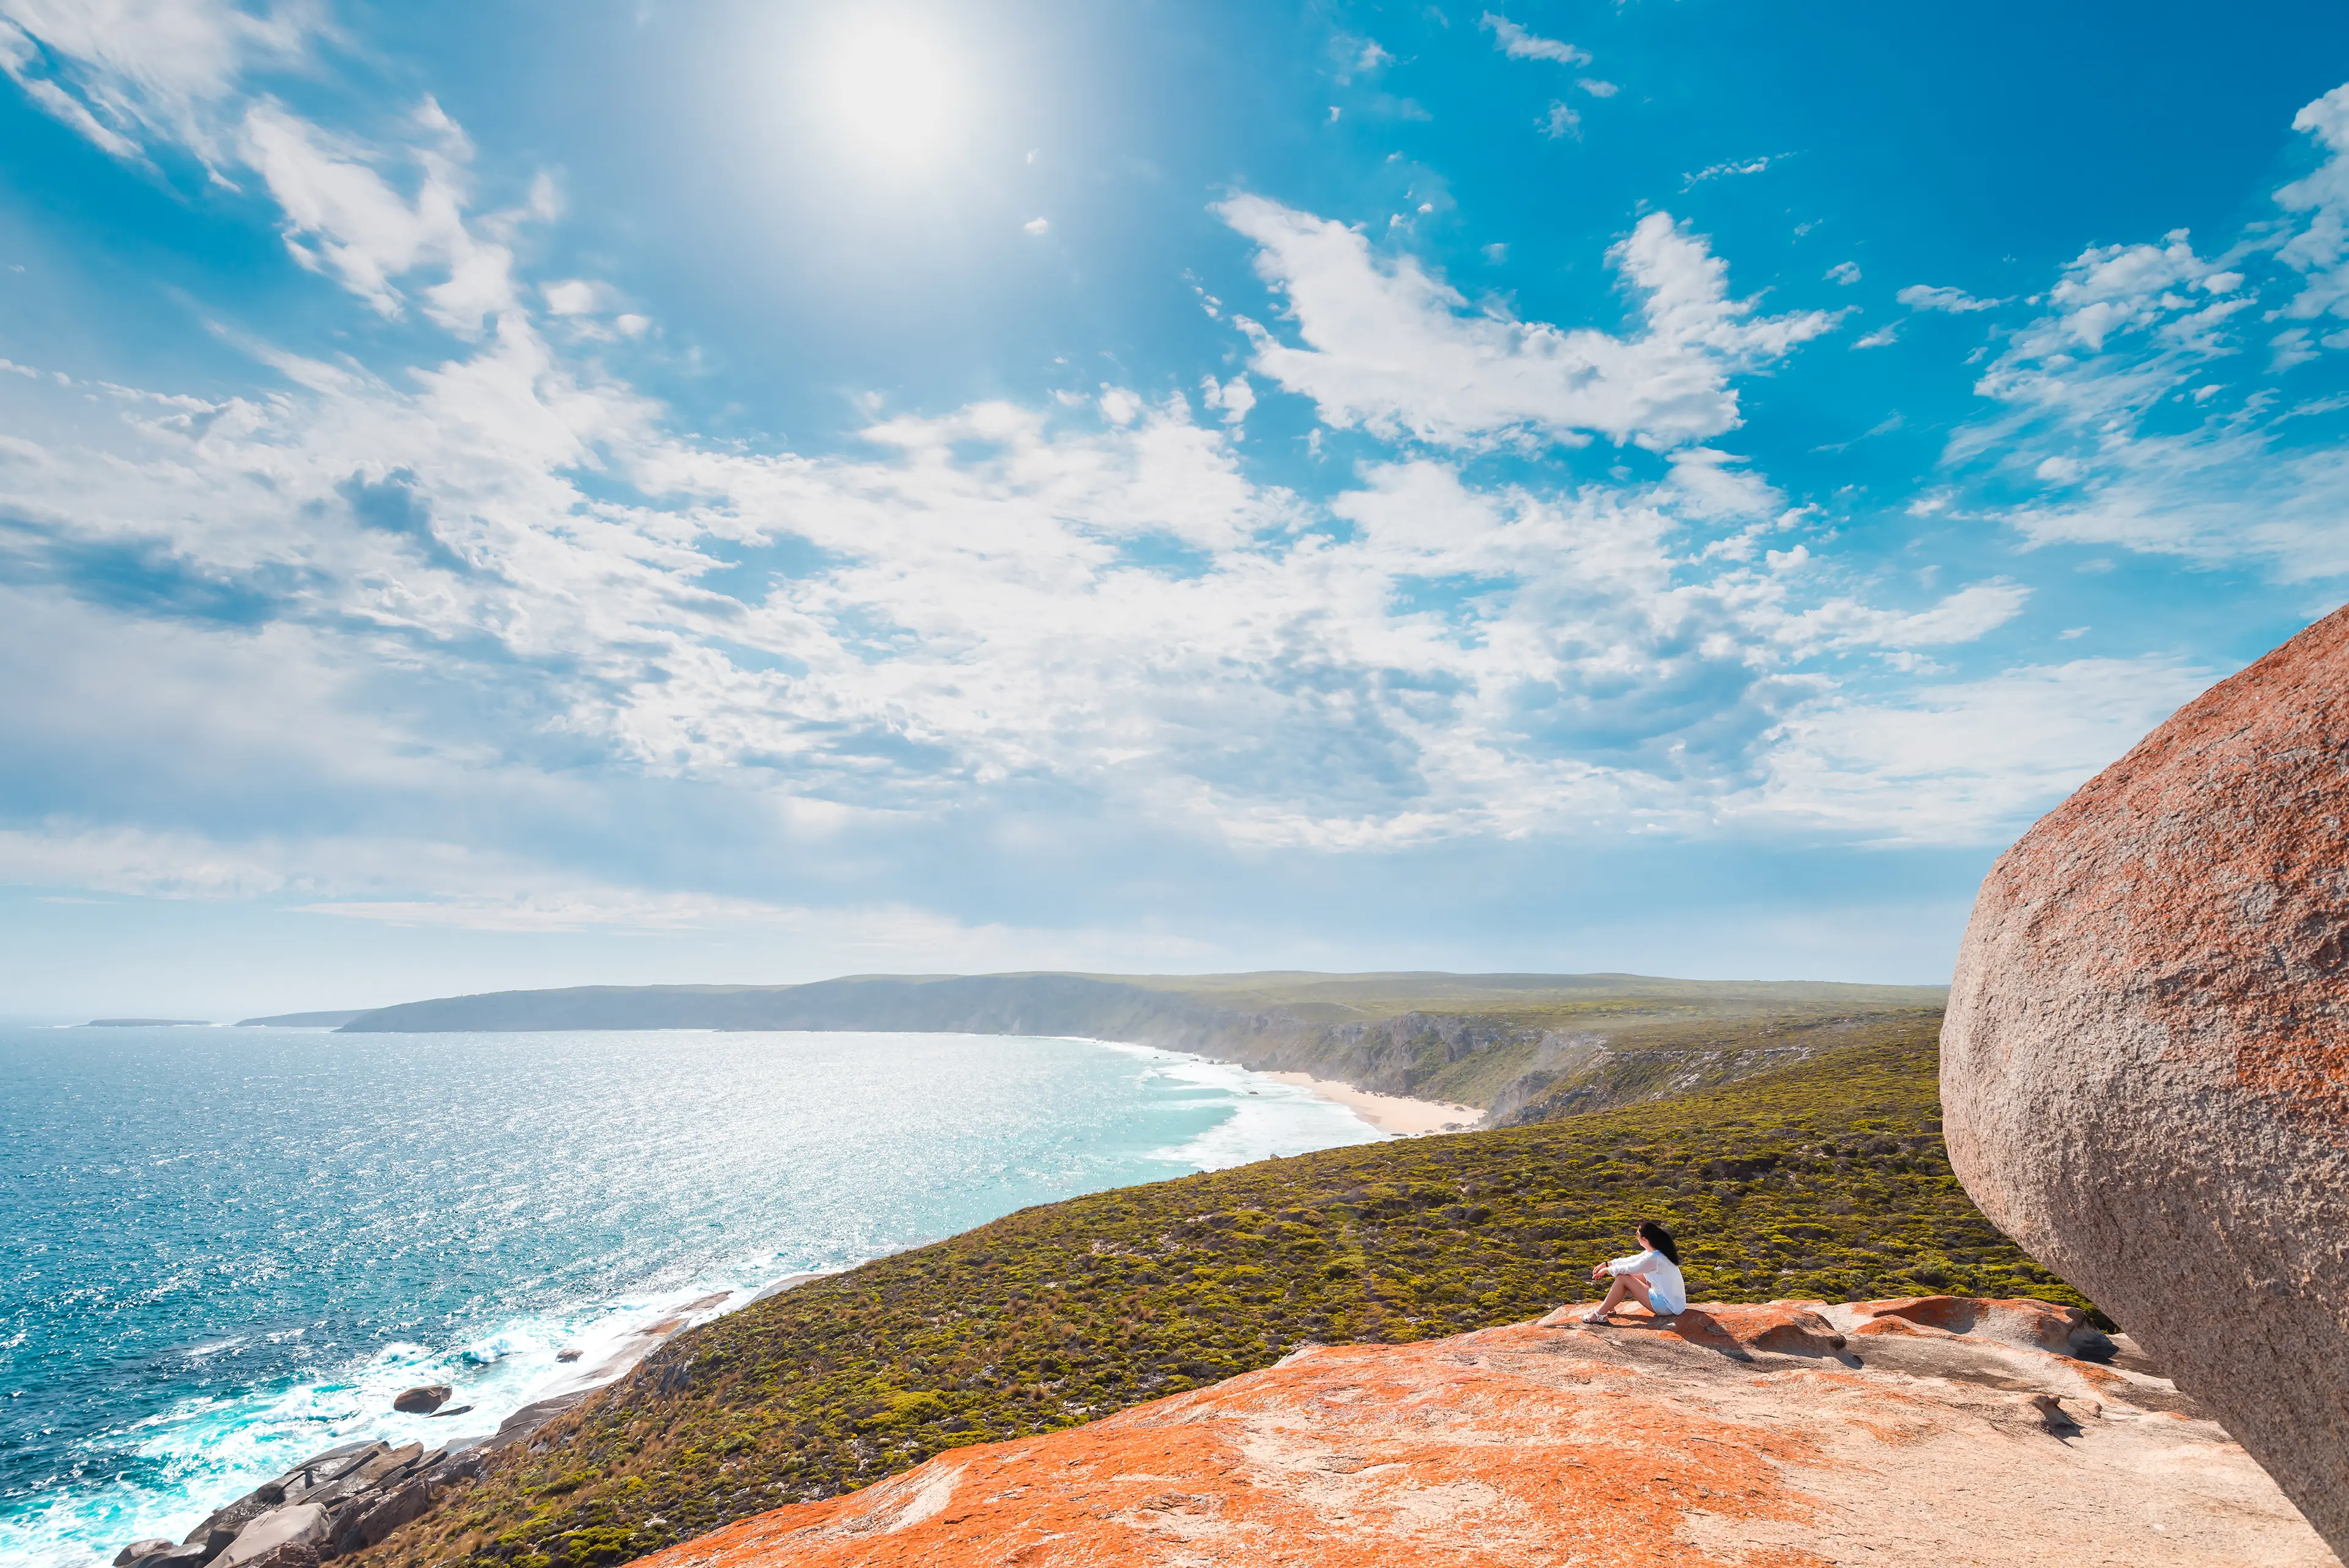 4-Day Unique Adventure for Couples in Kangaroo Island: Food, Wine, Outdoors